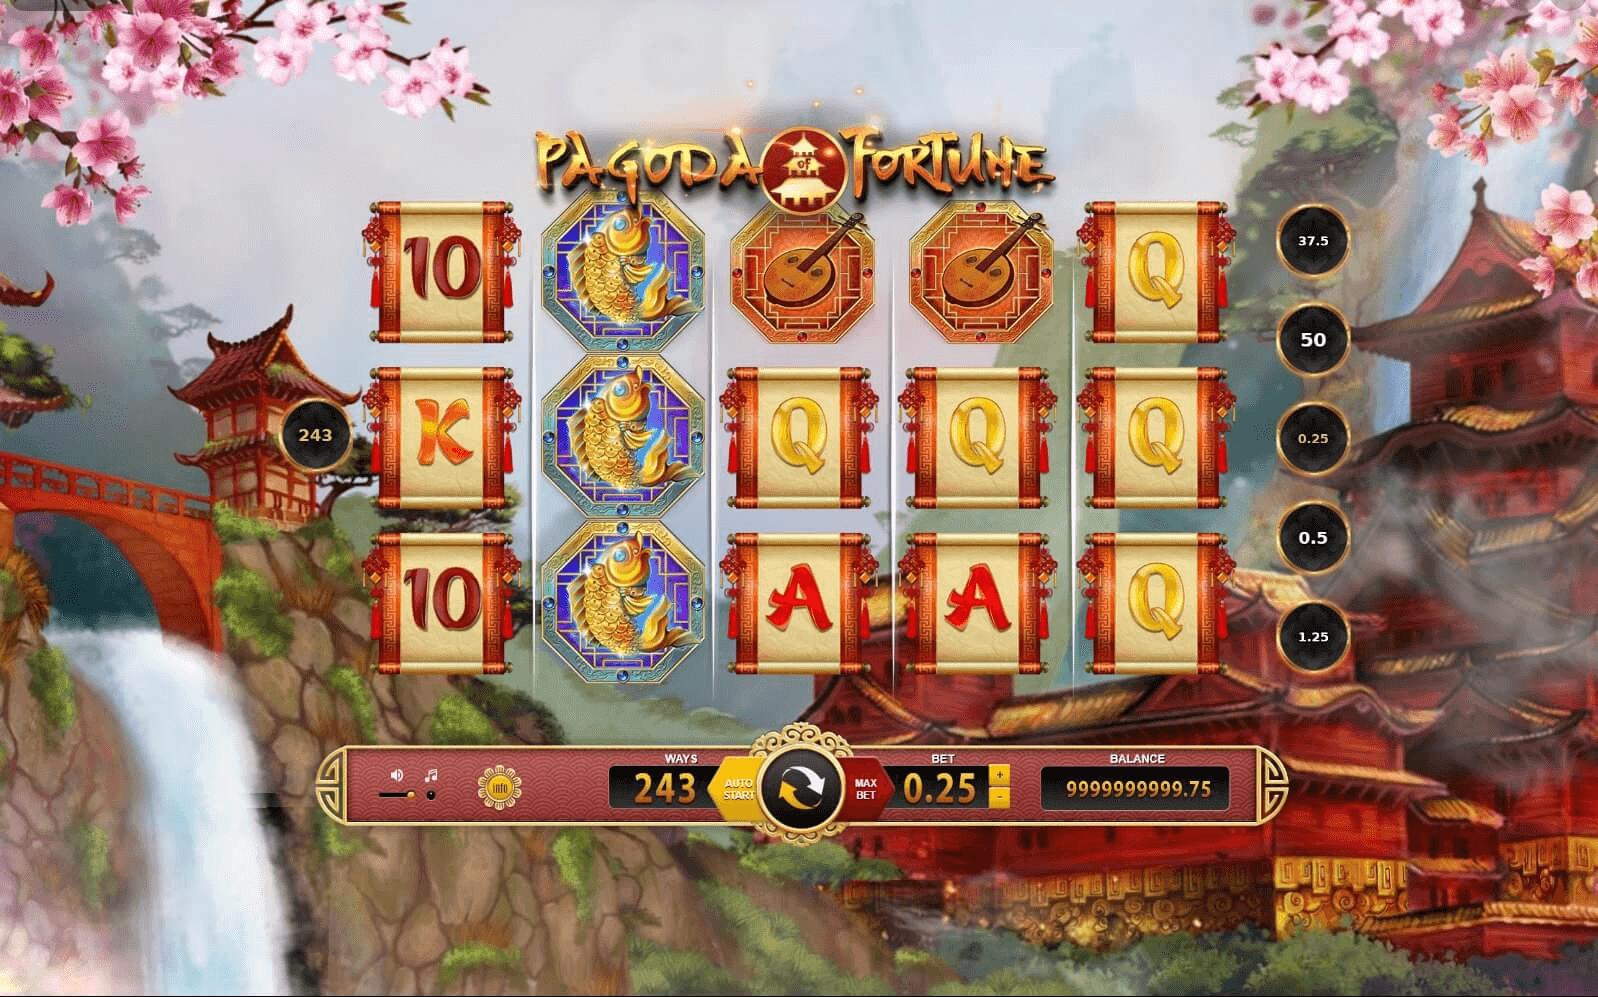 Pagoda of Fortune slot play free